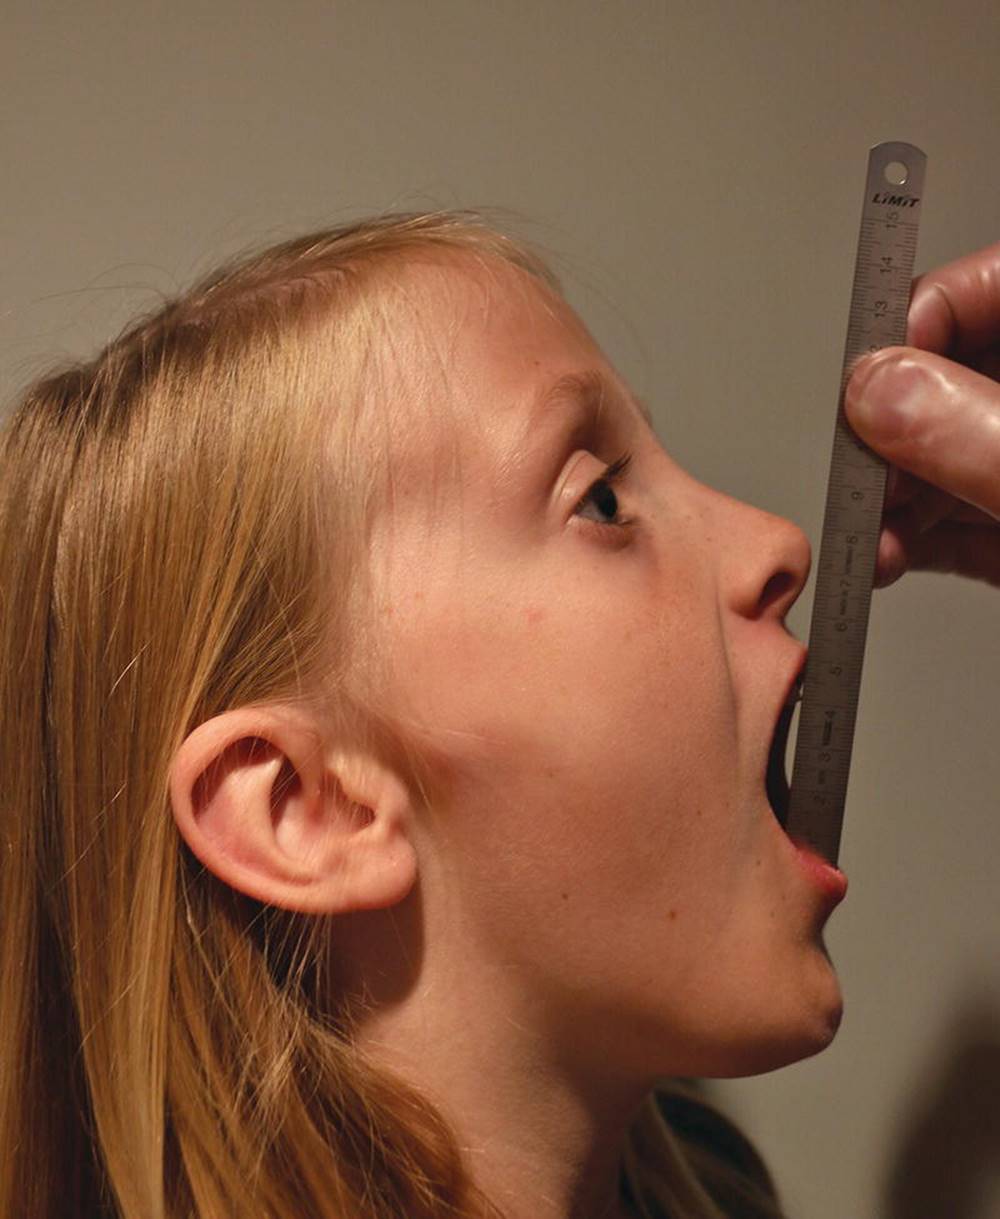 Photo of a patient whose maximal jaw opening capacity is being measured with a ruler.